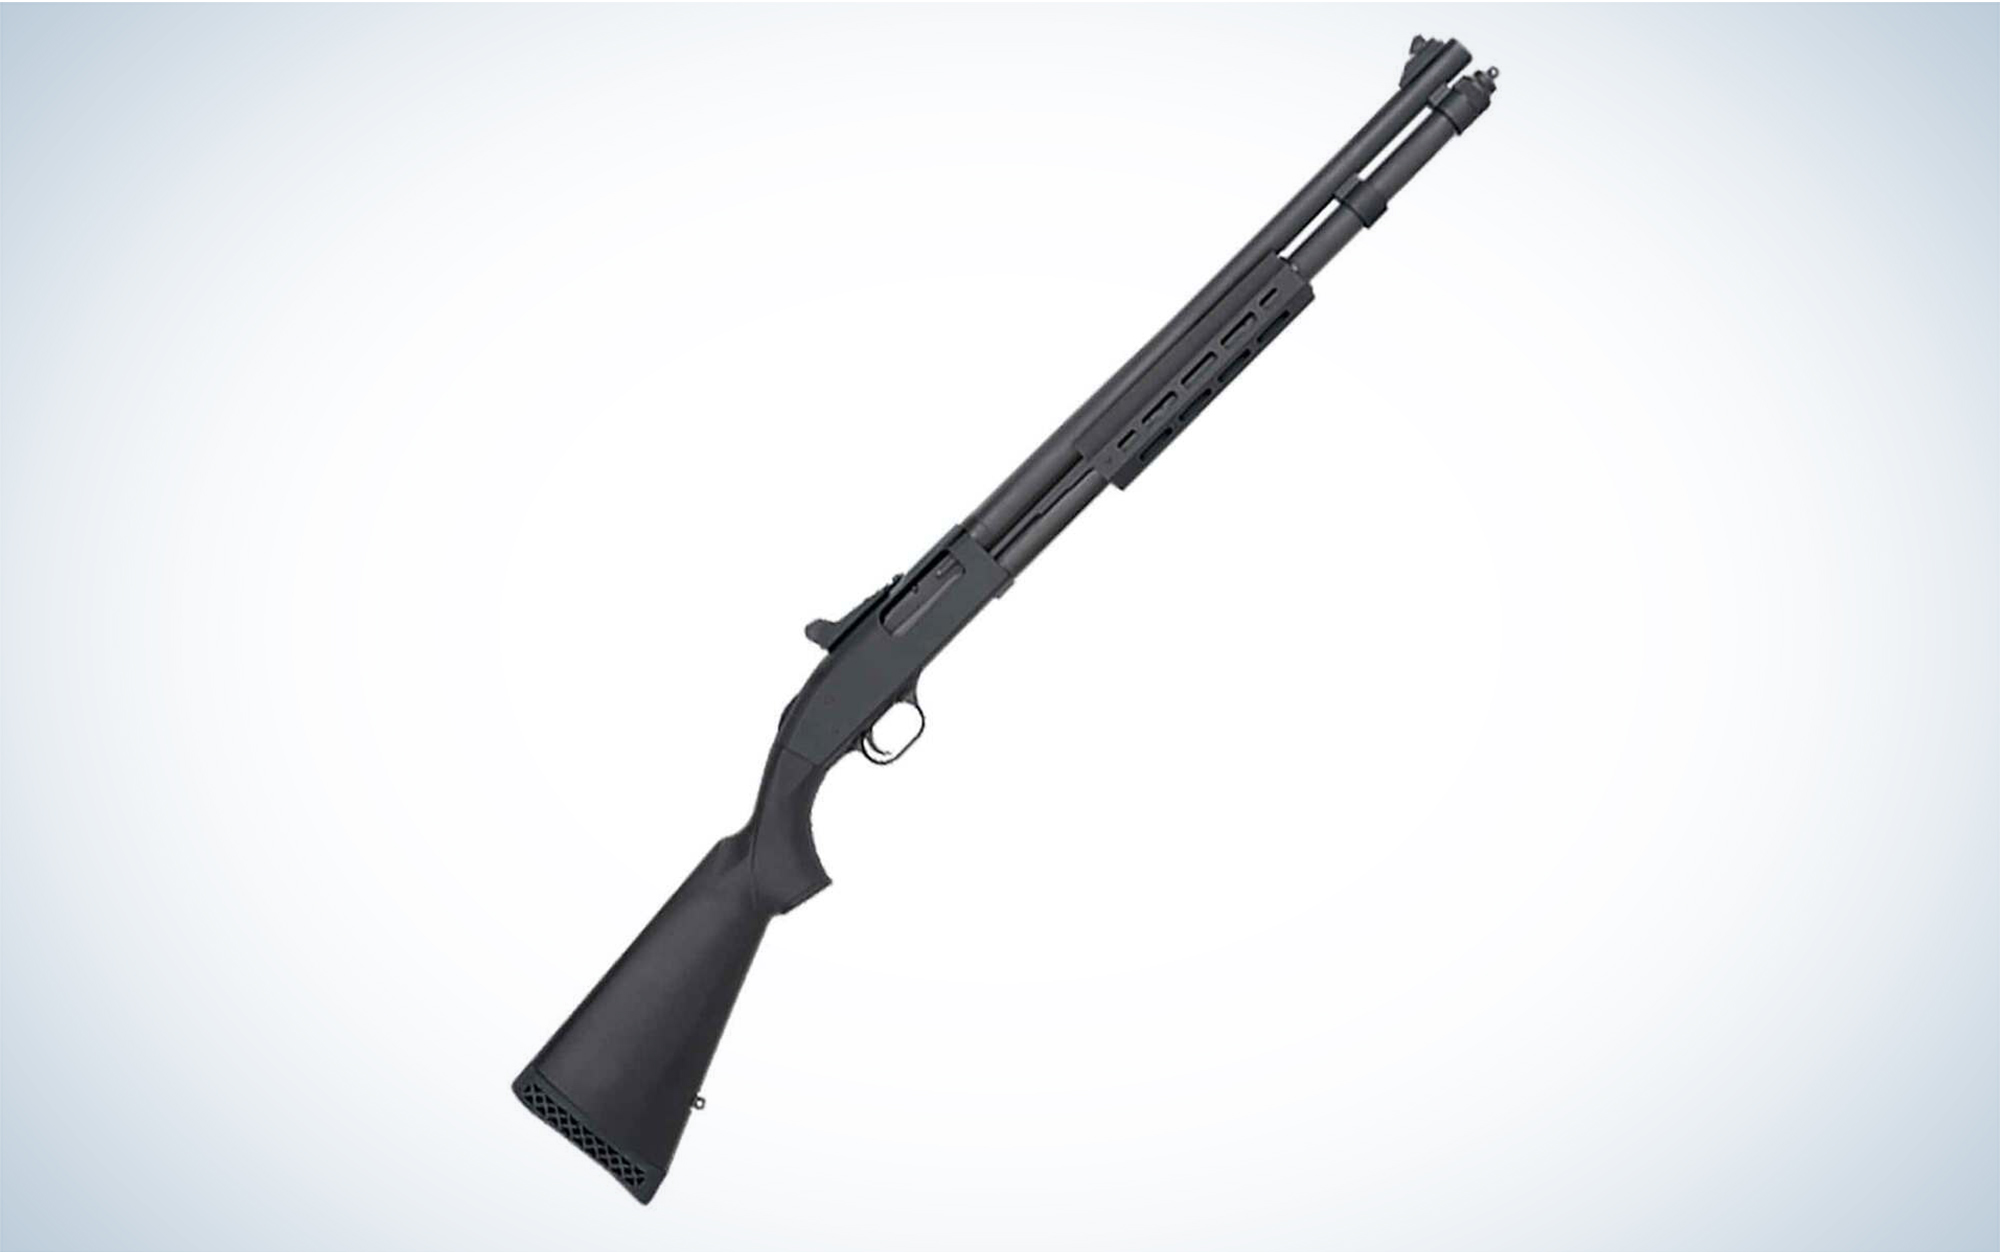 We tested the Mossberg 590 12 Gauge 3-inch Pump Action 20-inch.